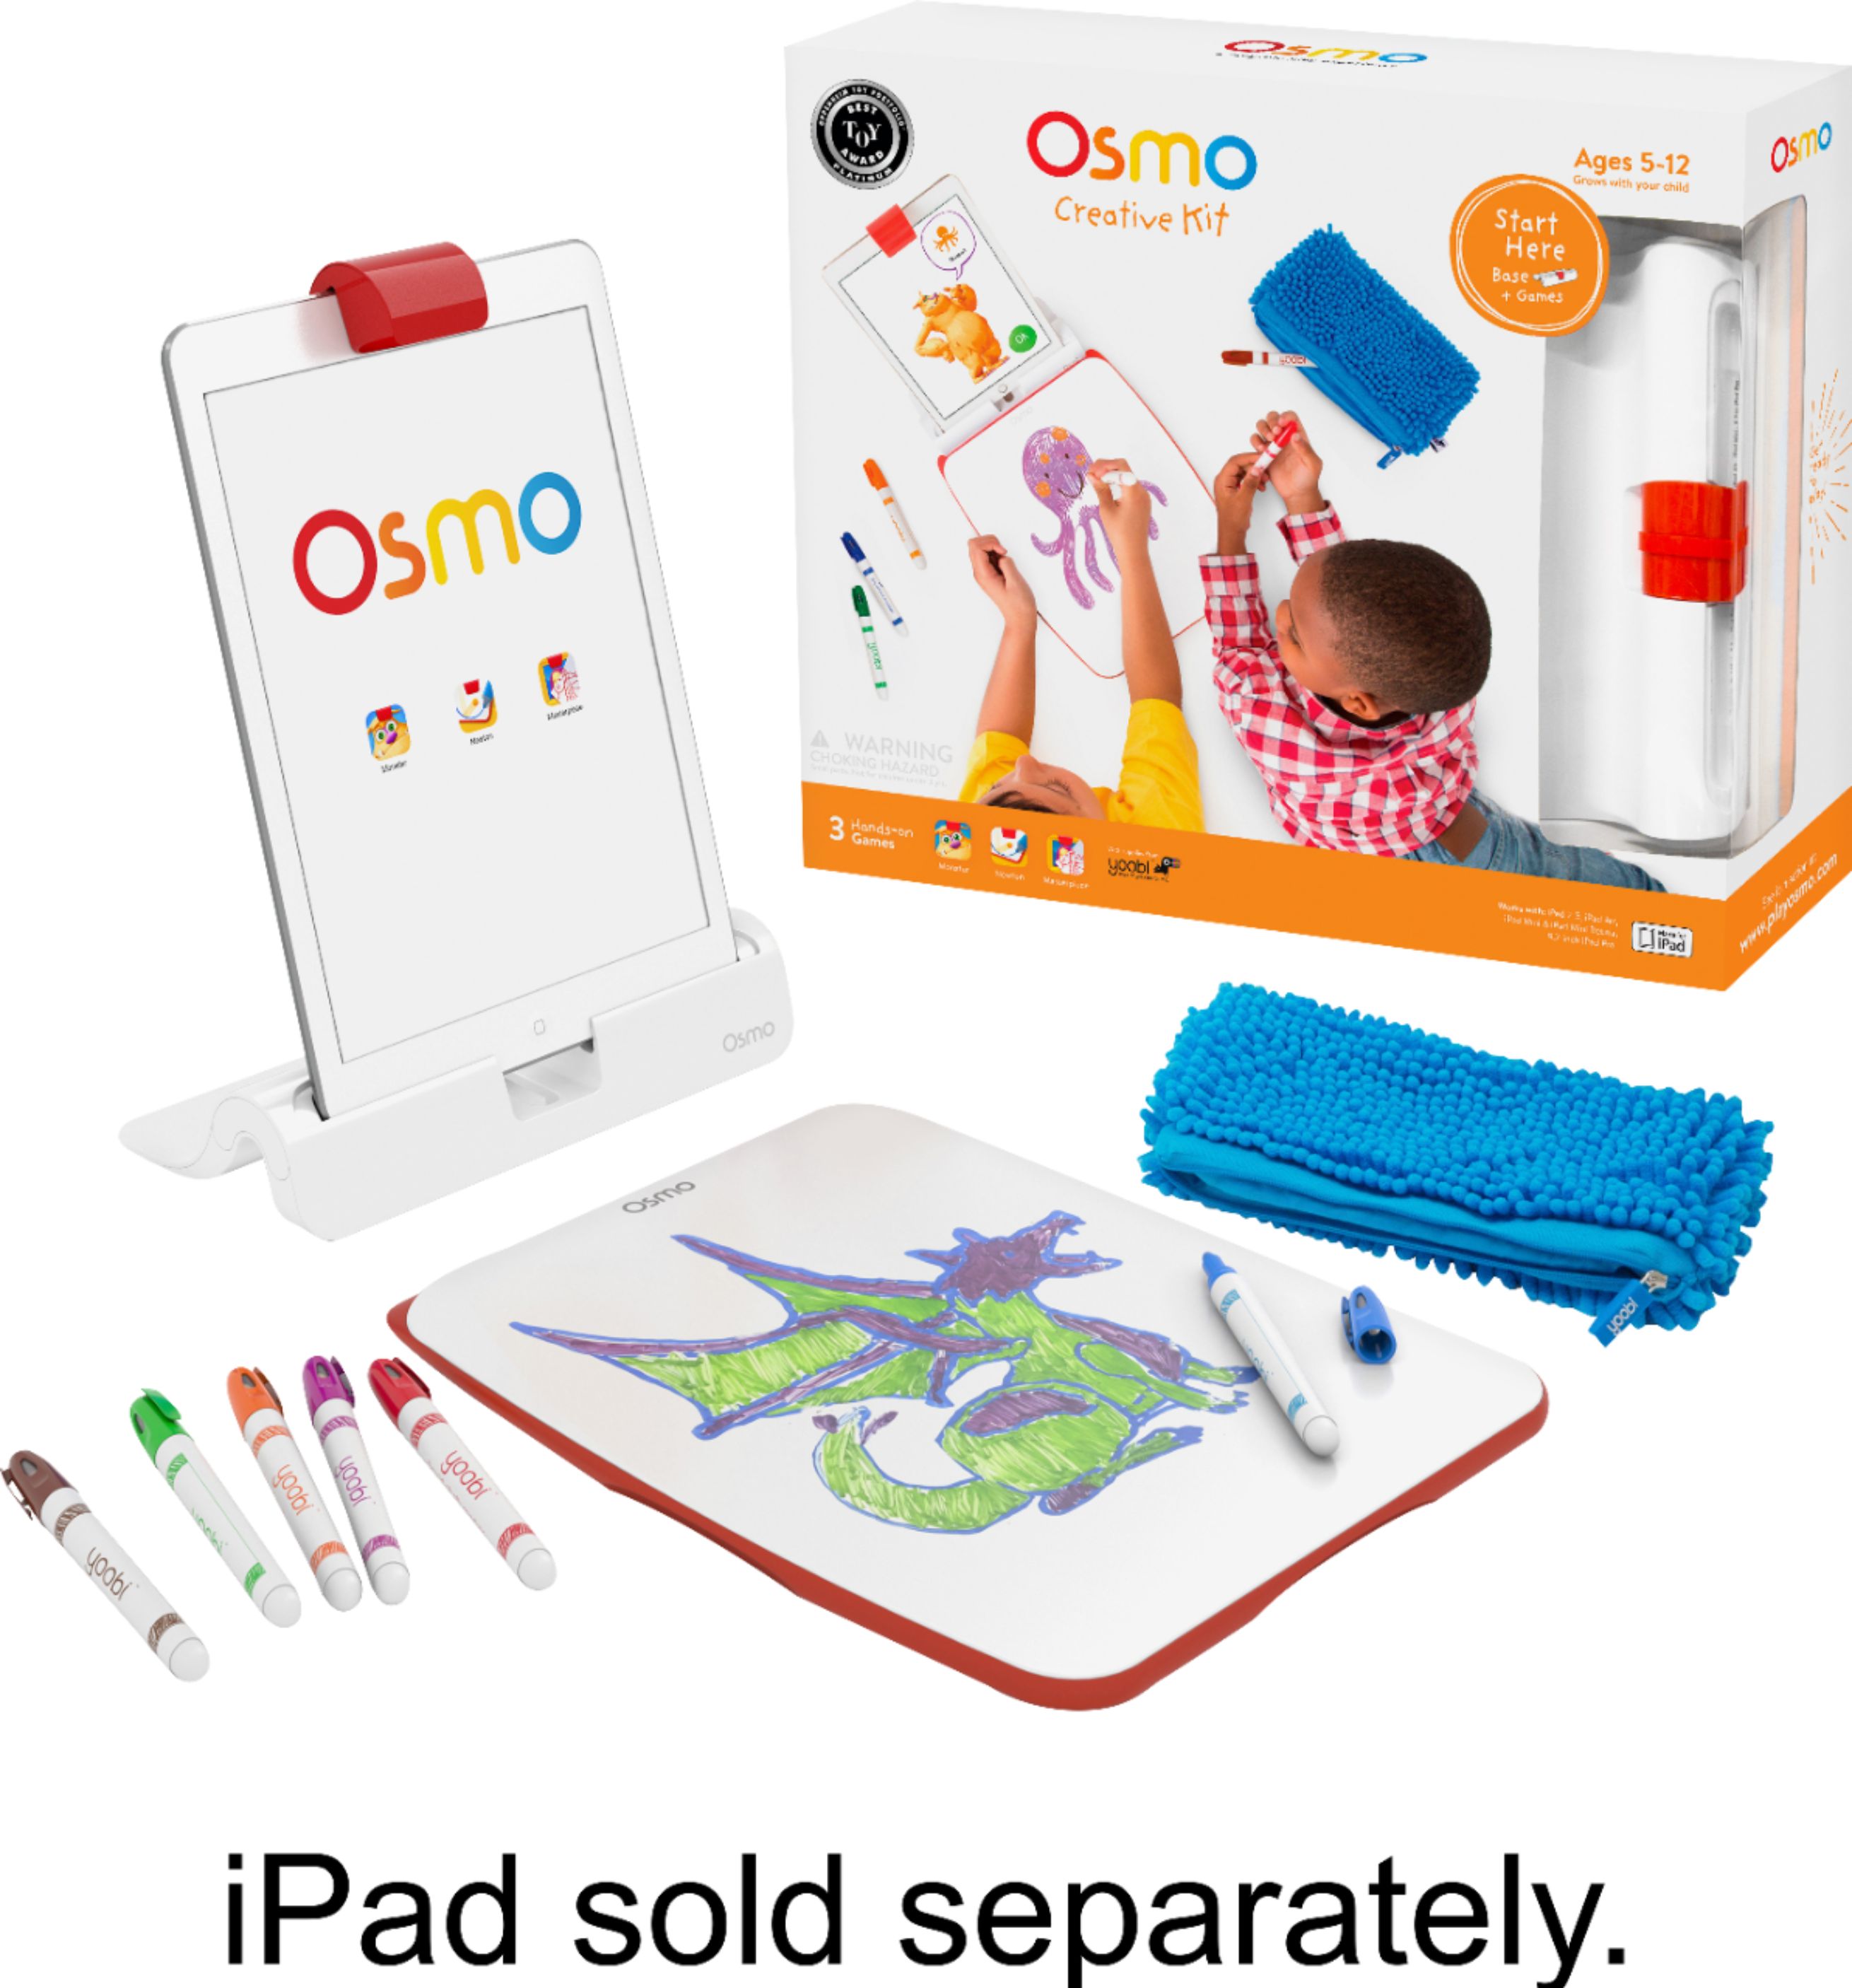 Osmo Creative Kit Educational Play System with Mo the - Best Buy